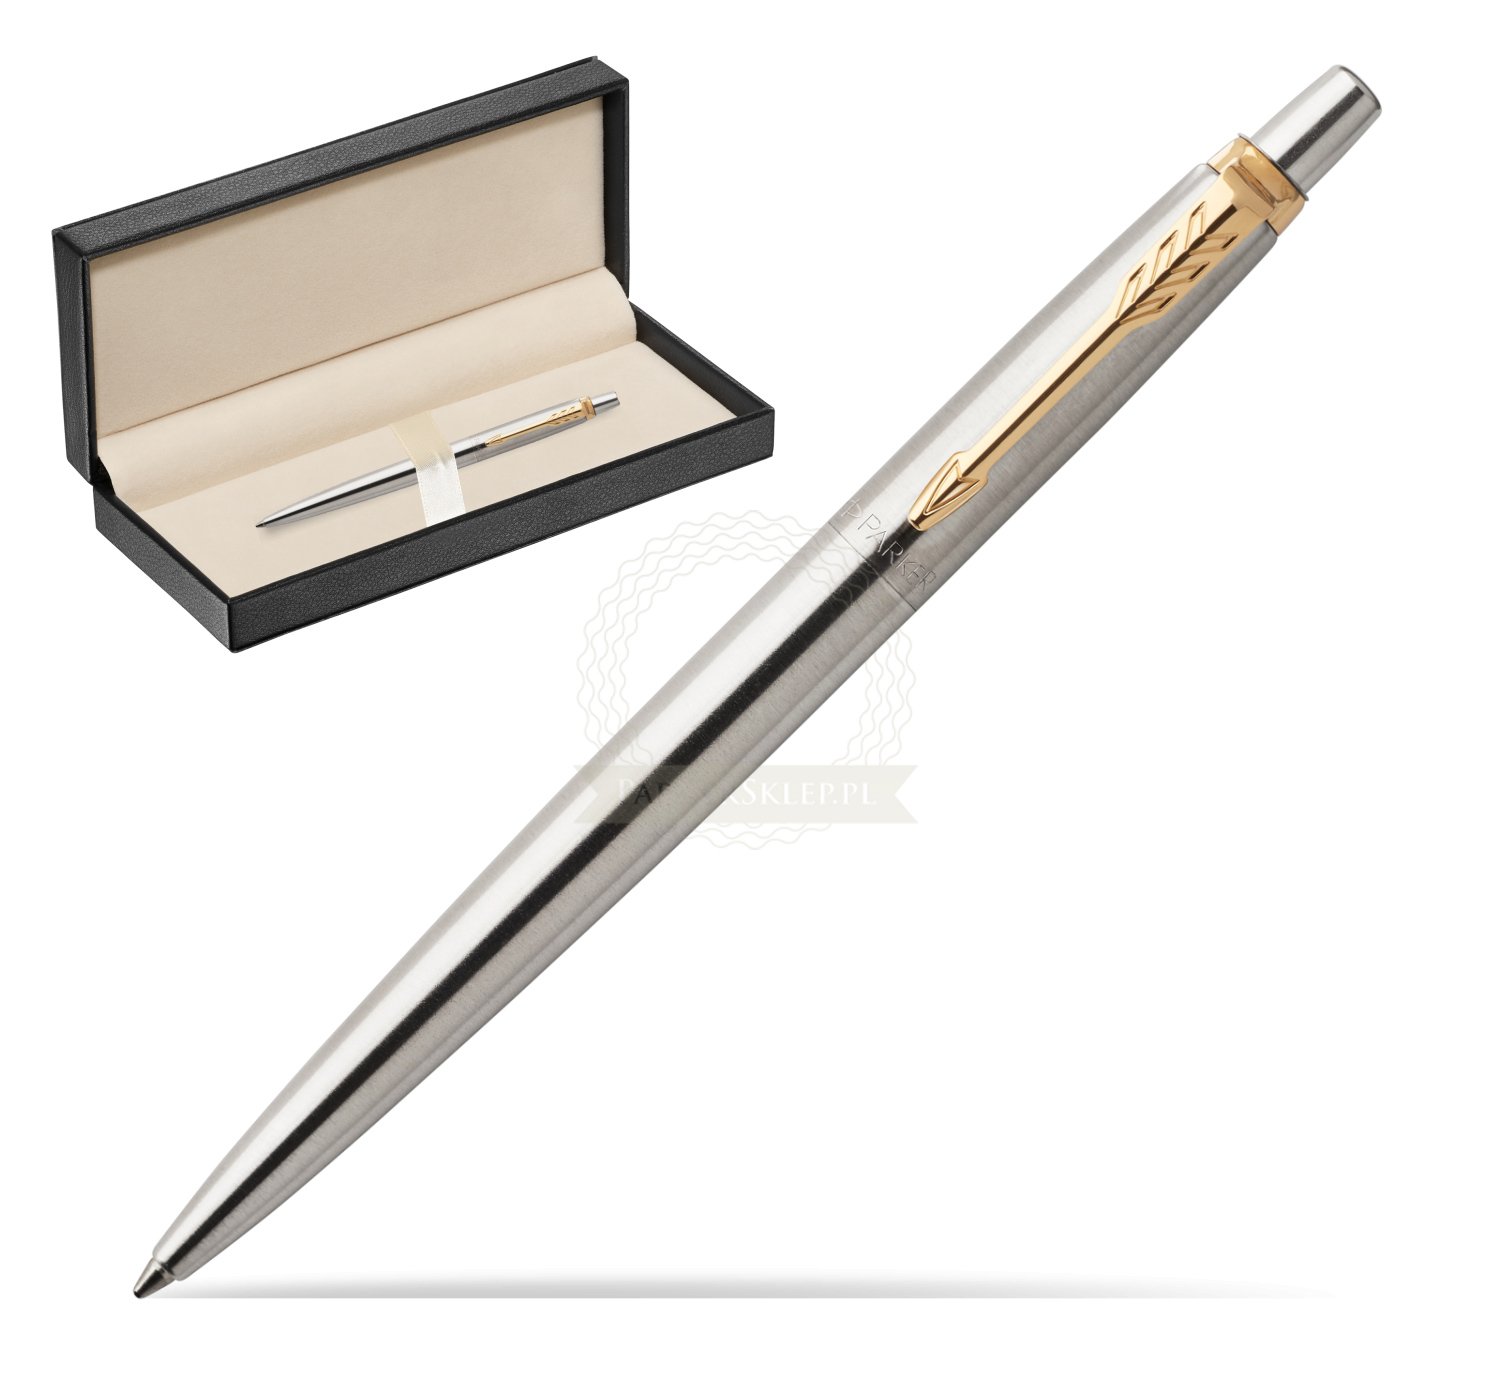  Parker 1953182 Jotter Colors Pen, Steel and Gold, Ball Point :  Everything Else